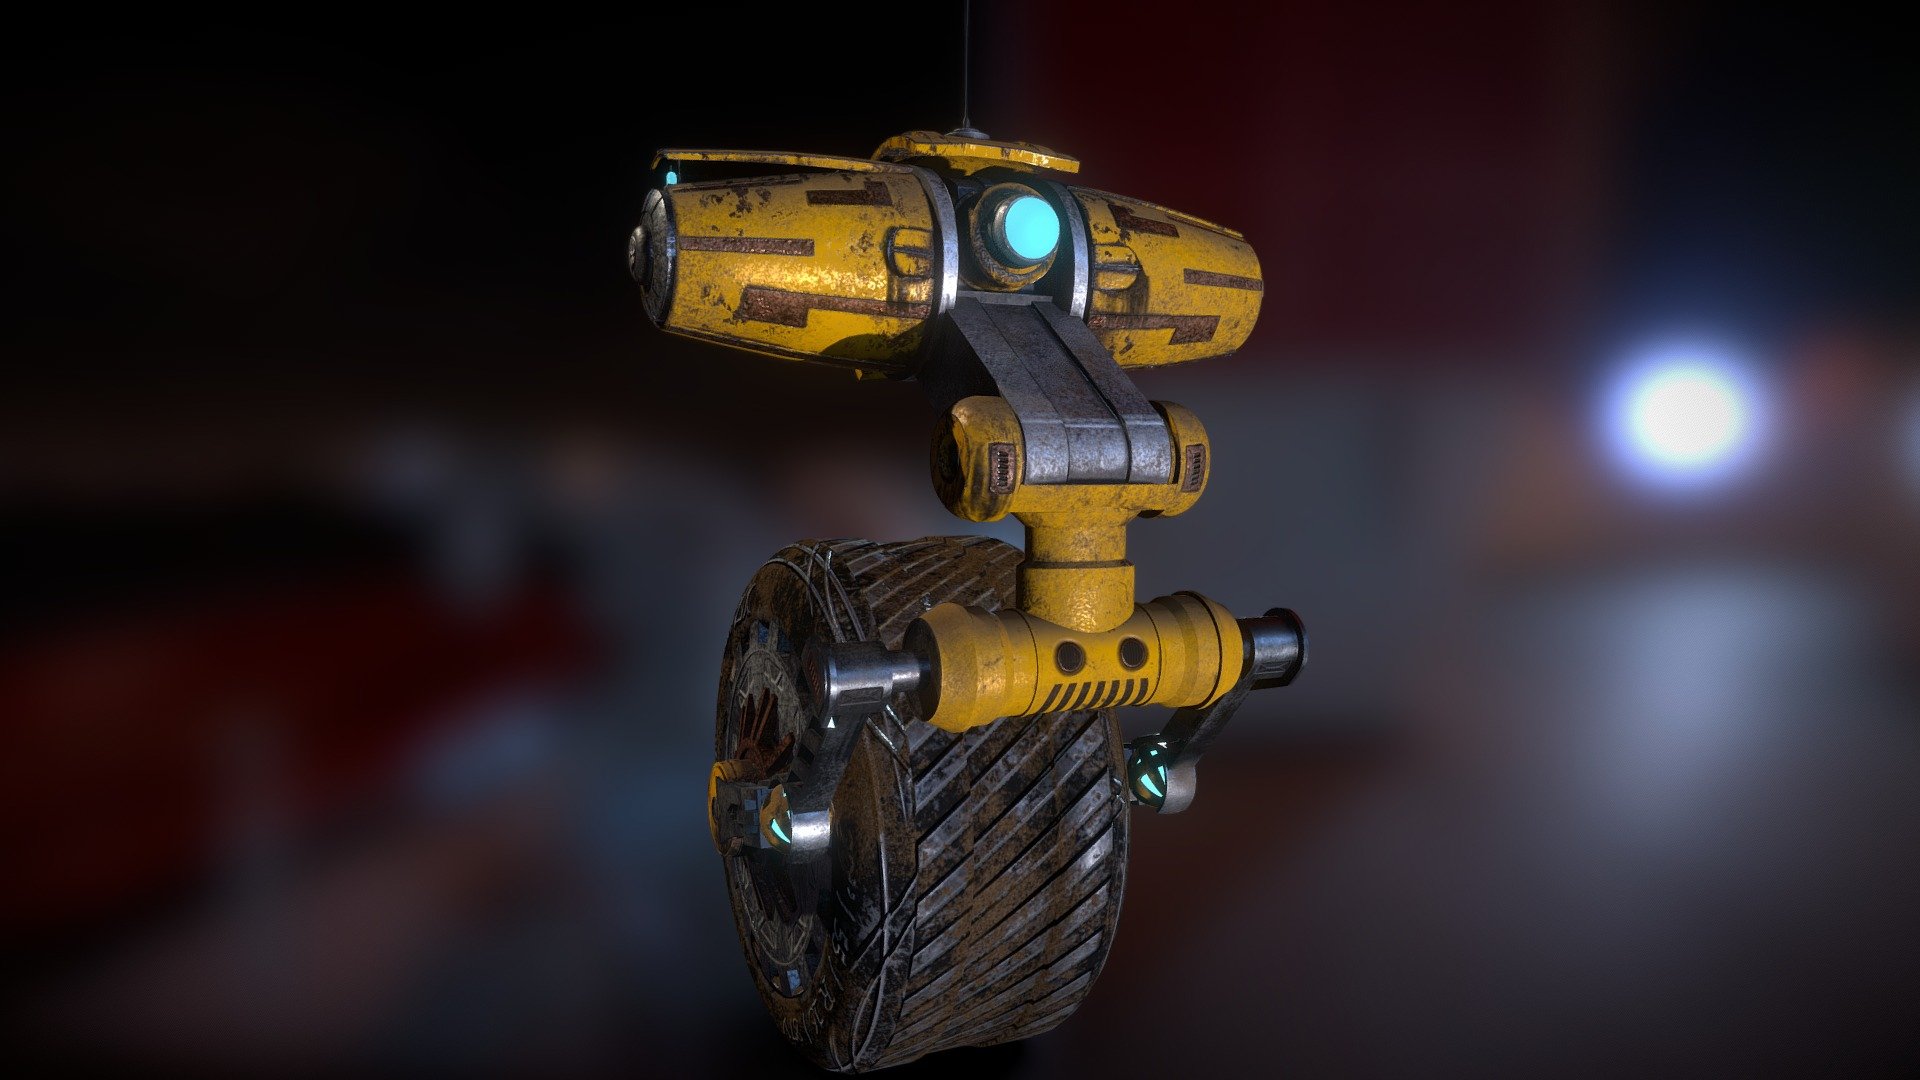 My entry for the RobotTextureChallenge I named it Riding Robot texture with Substance Painter inspired by Fallout, Borderlands 
and Star Wars If You need 3D Game Assets or, STL Files I can do commission works.

Original Model by Paul Chambers
sketchfab.com/paulchambers3d - Riding Robot Texturing by Pablo Garcia - Download Free 3D model by paburoviii 3d model